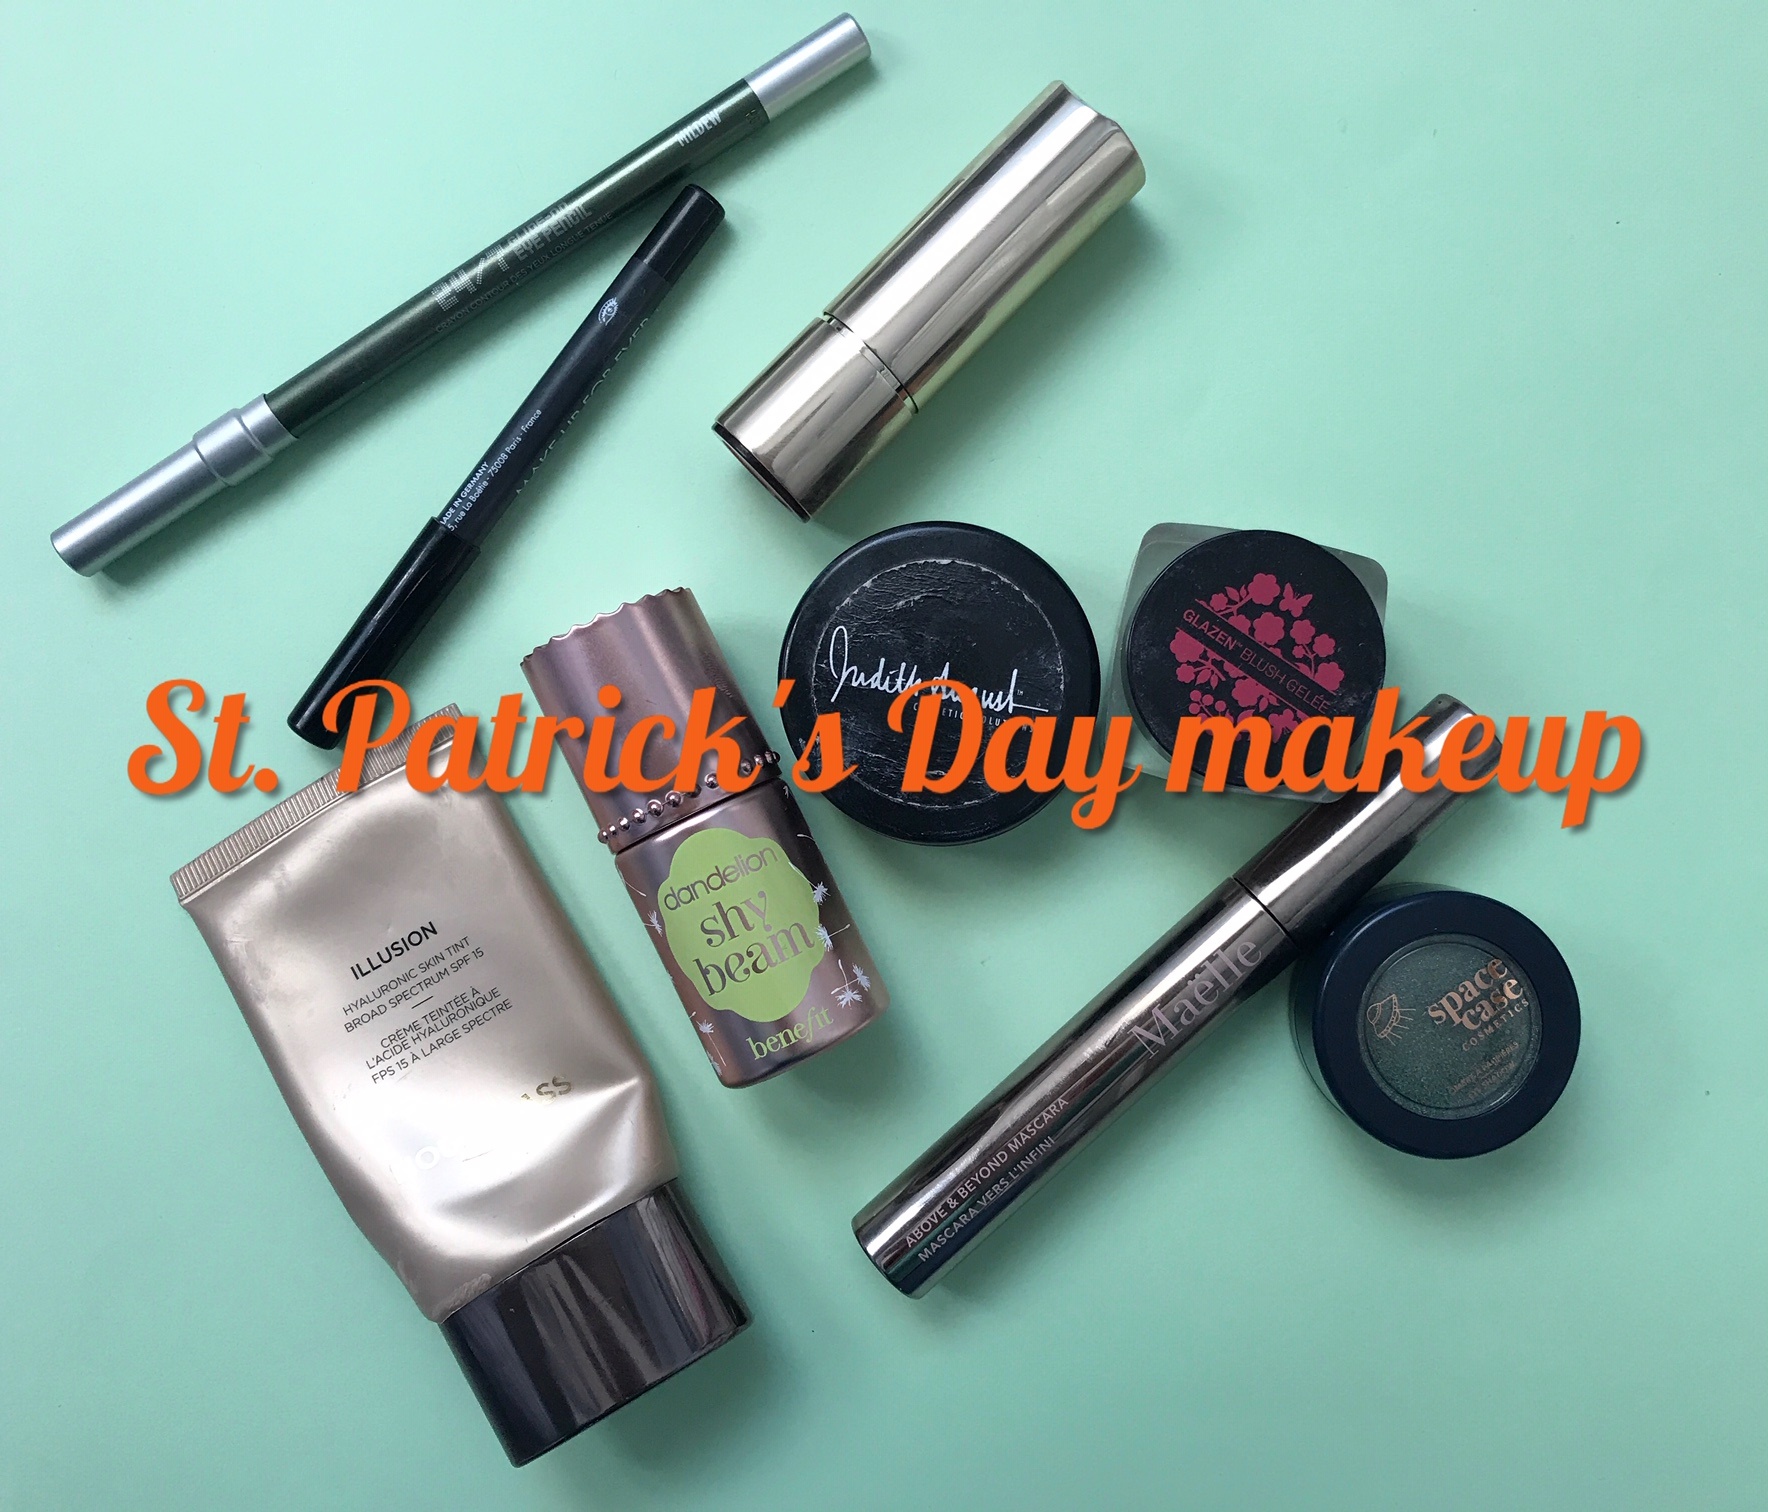 makeup items for St Patrick's Day, neversaydiebeauty.com